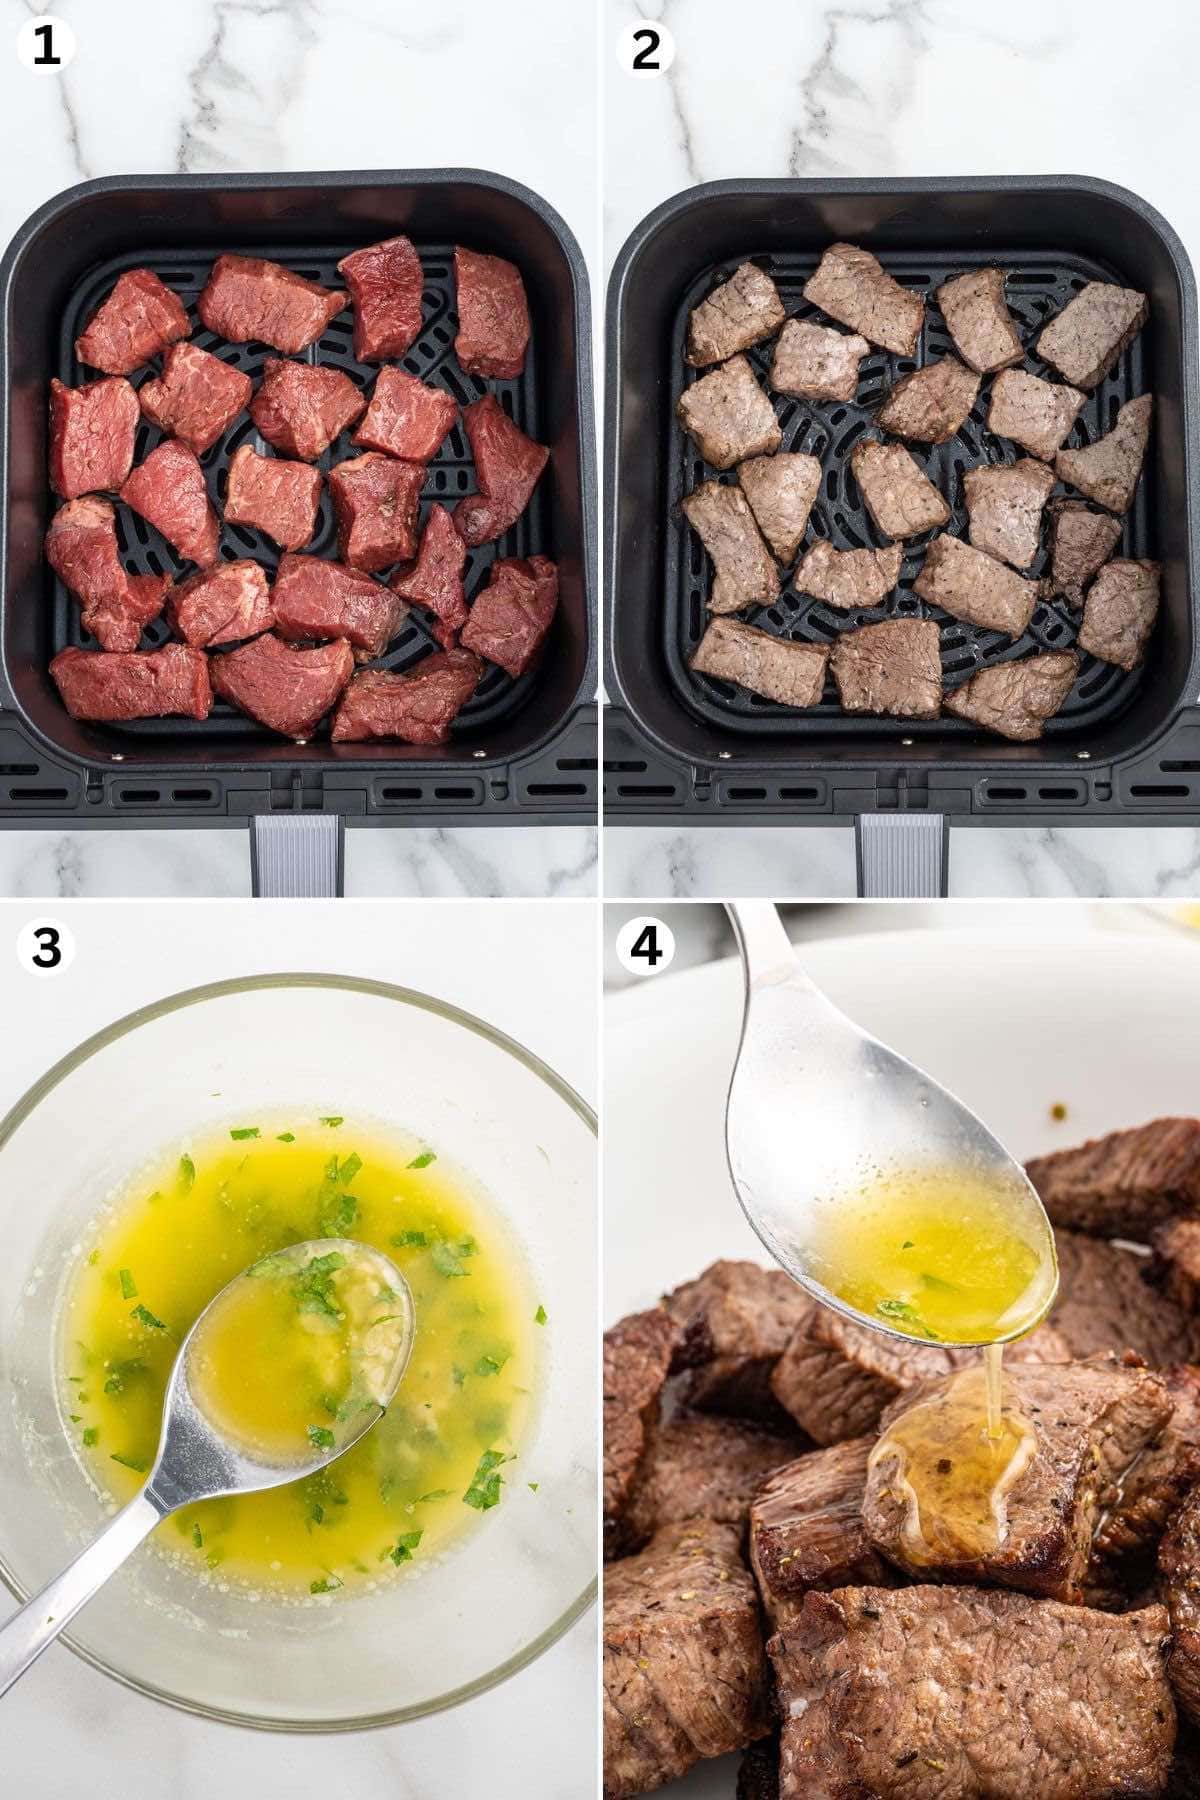 Put the steak cubes to the air fryer. Cook the steak cubes. Make the butter mixture in a bowl. Pour the butter mixture on top of the steak bites.